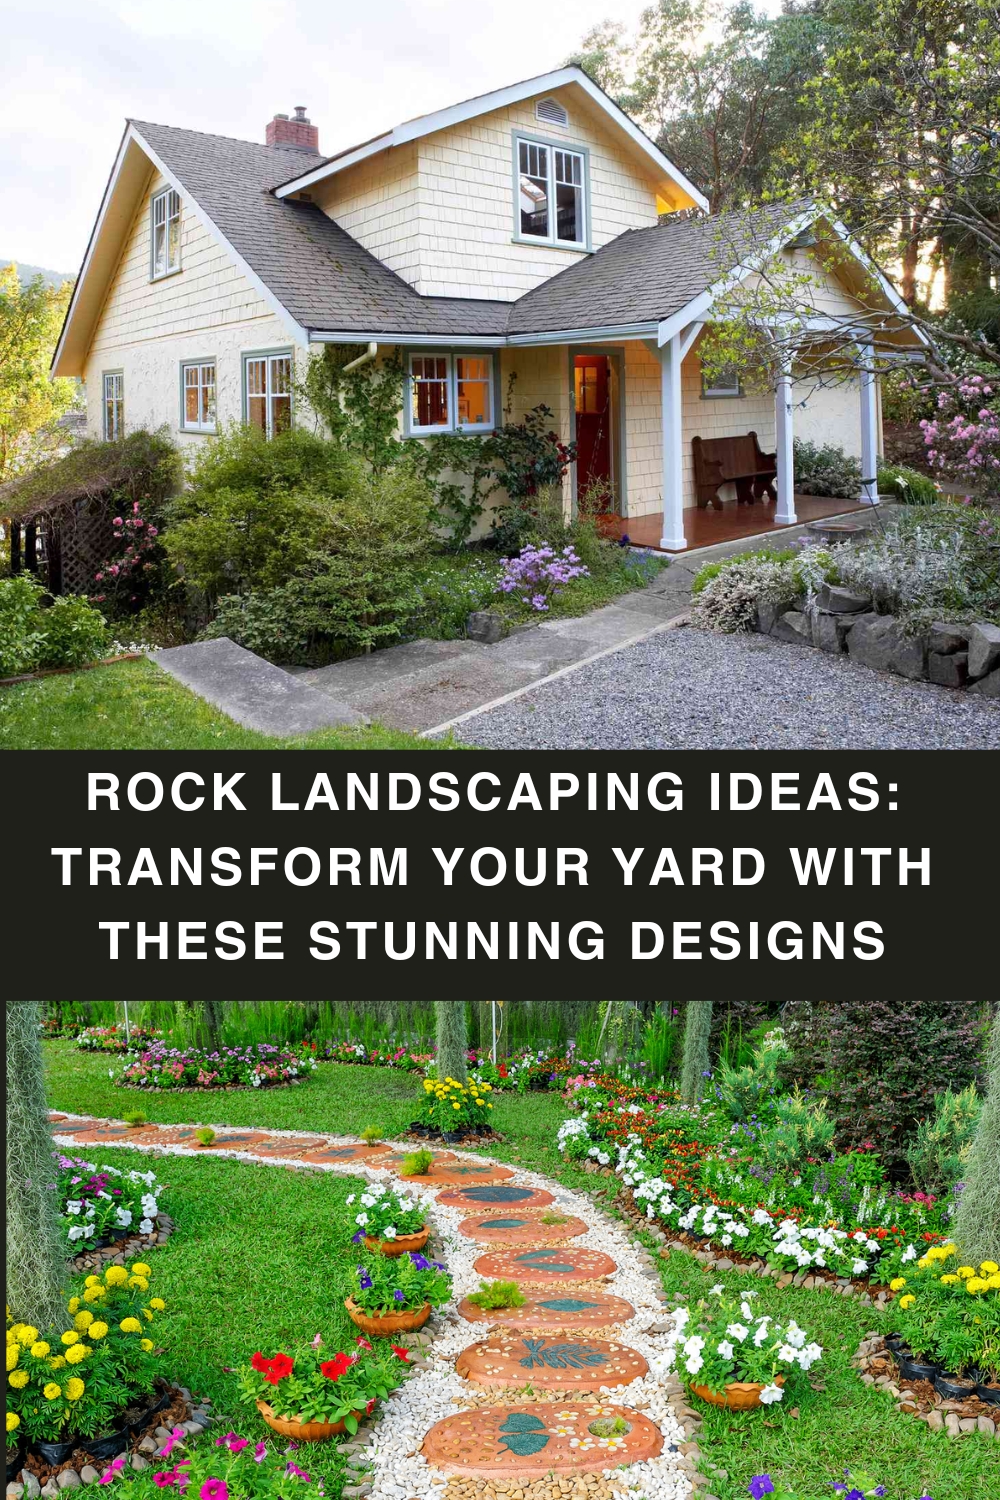 Rock Landscaping Ideas: Transform Your Yard with These Stunning Designs pin